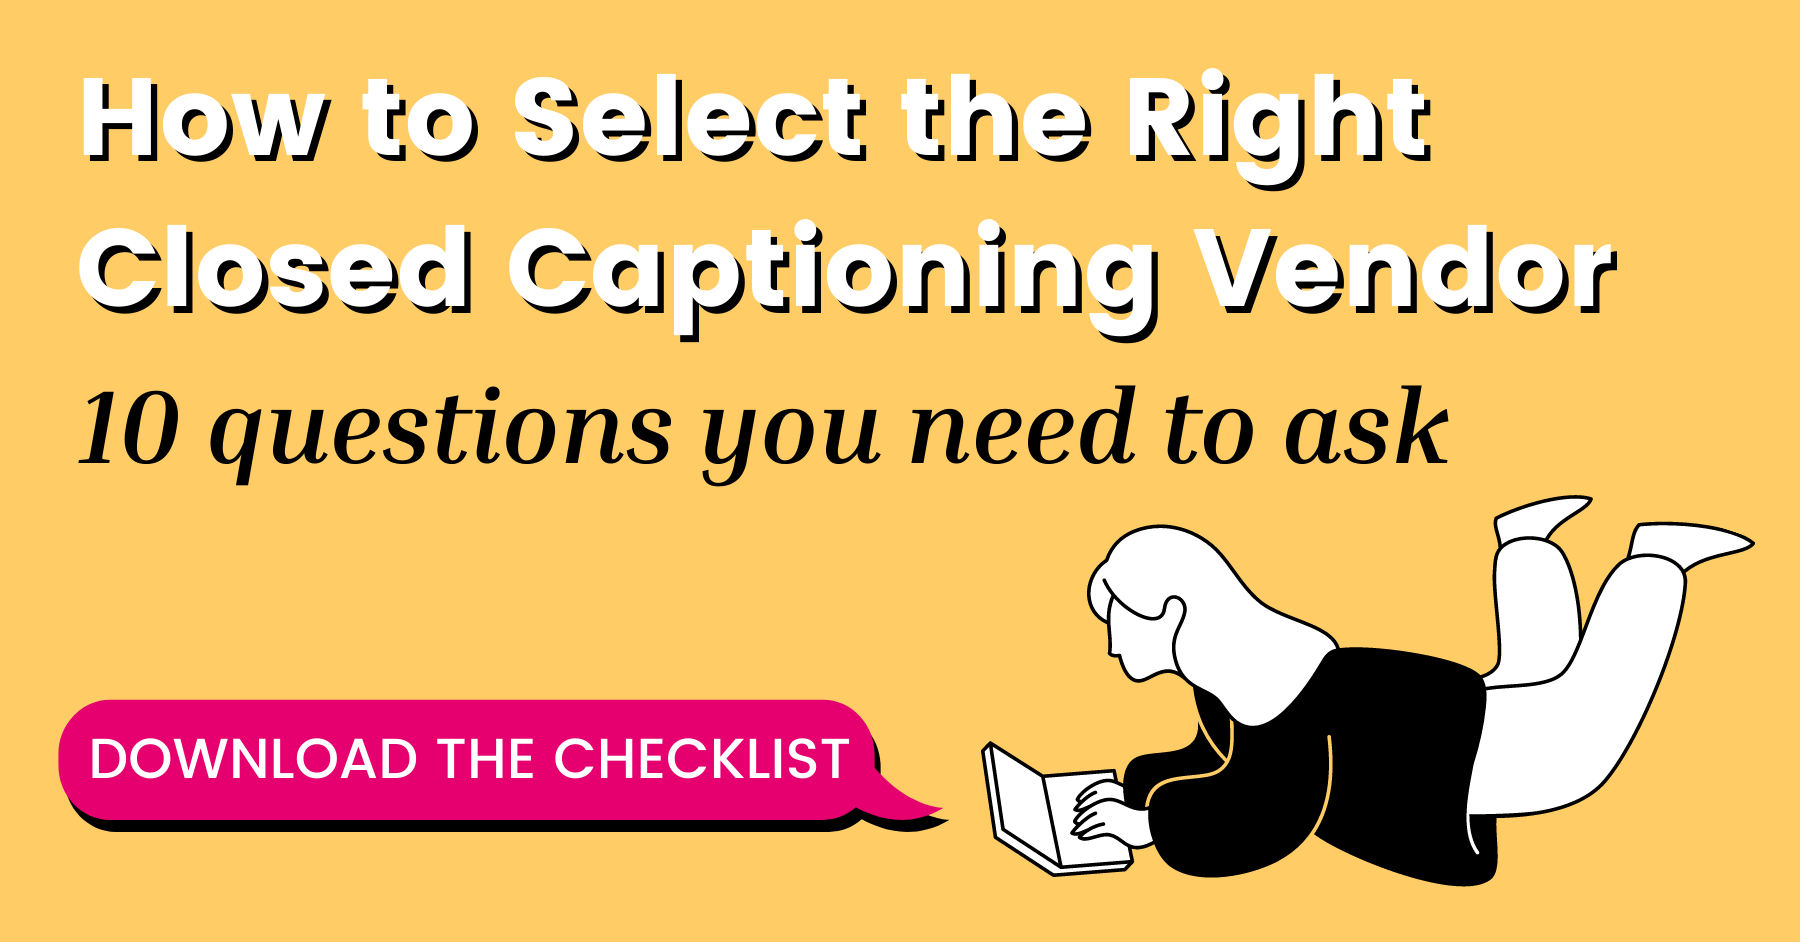 How to Select the Right Closed Captioning Vendor, 10 questions you need to ask downloadable checklist